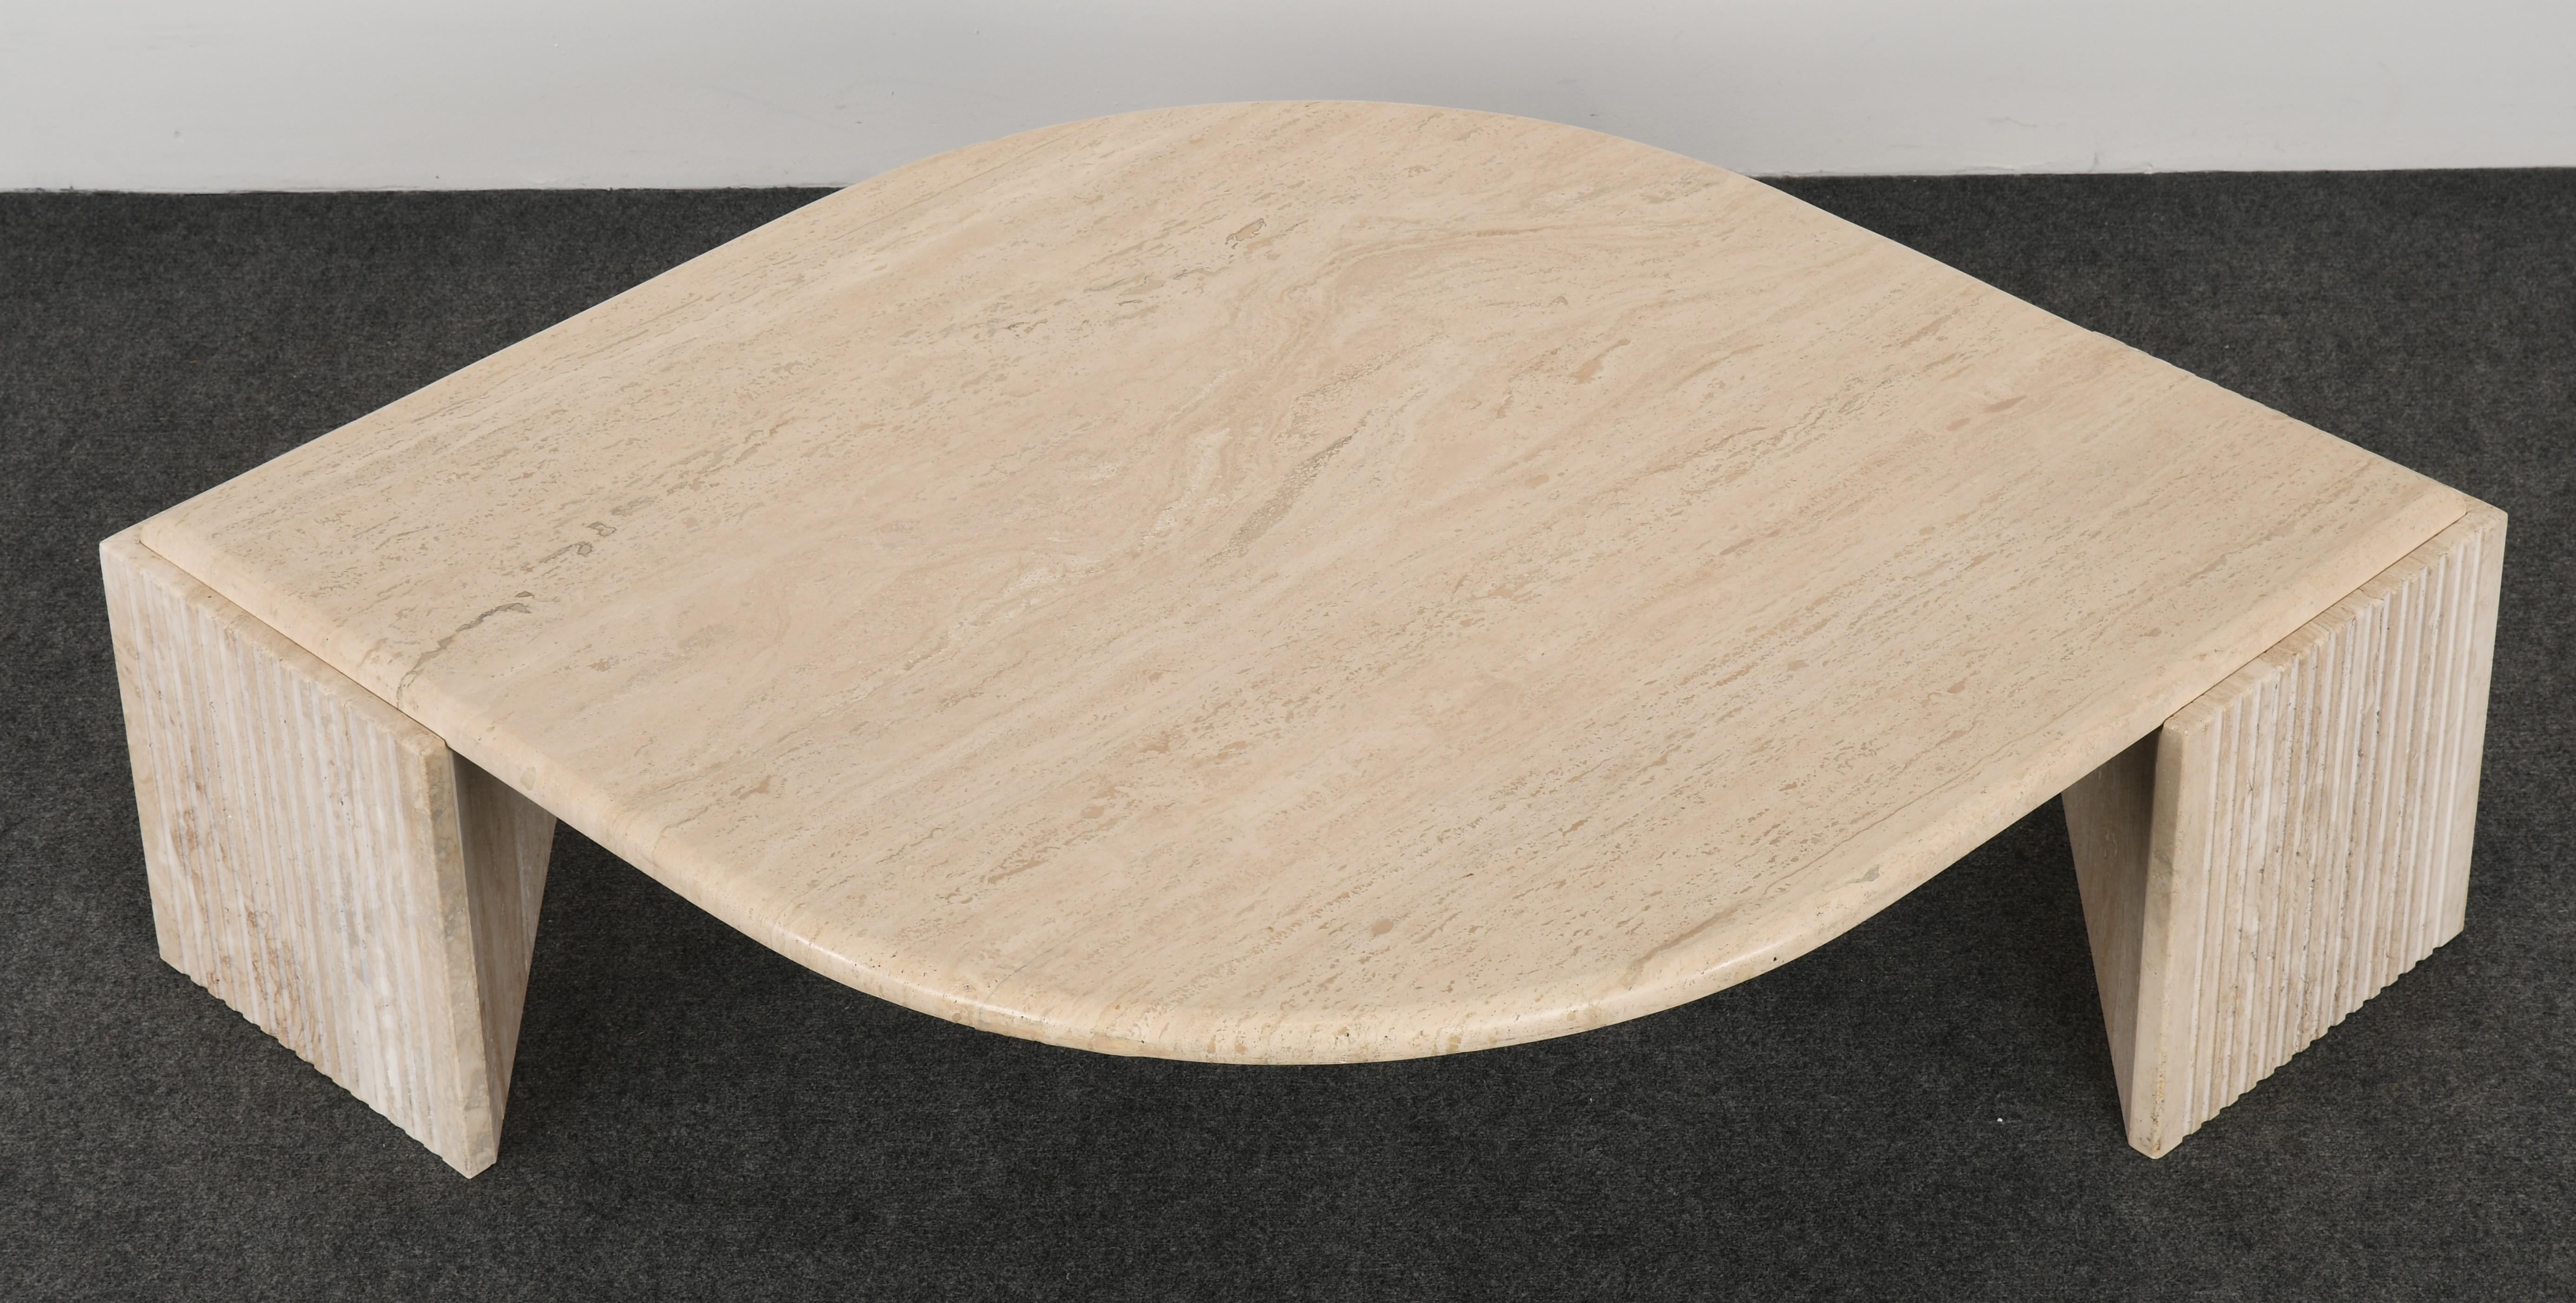 A beautiful Roche Bobois style travertine cocktail or coffee table. This table has two fluted or ribbed bases with a teardrop top. The table is structurally sound with age-appropriate wear. One of two available.

Dimensions: 14.75